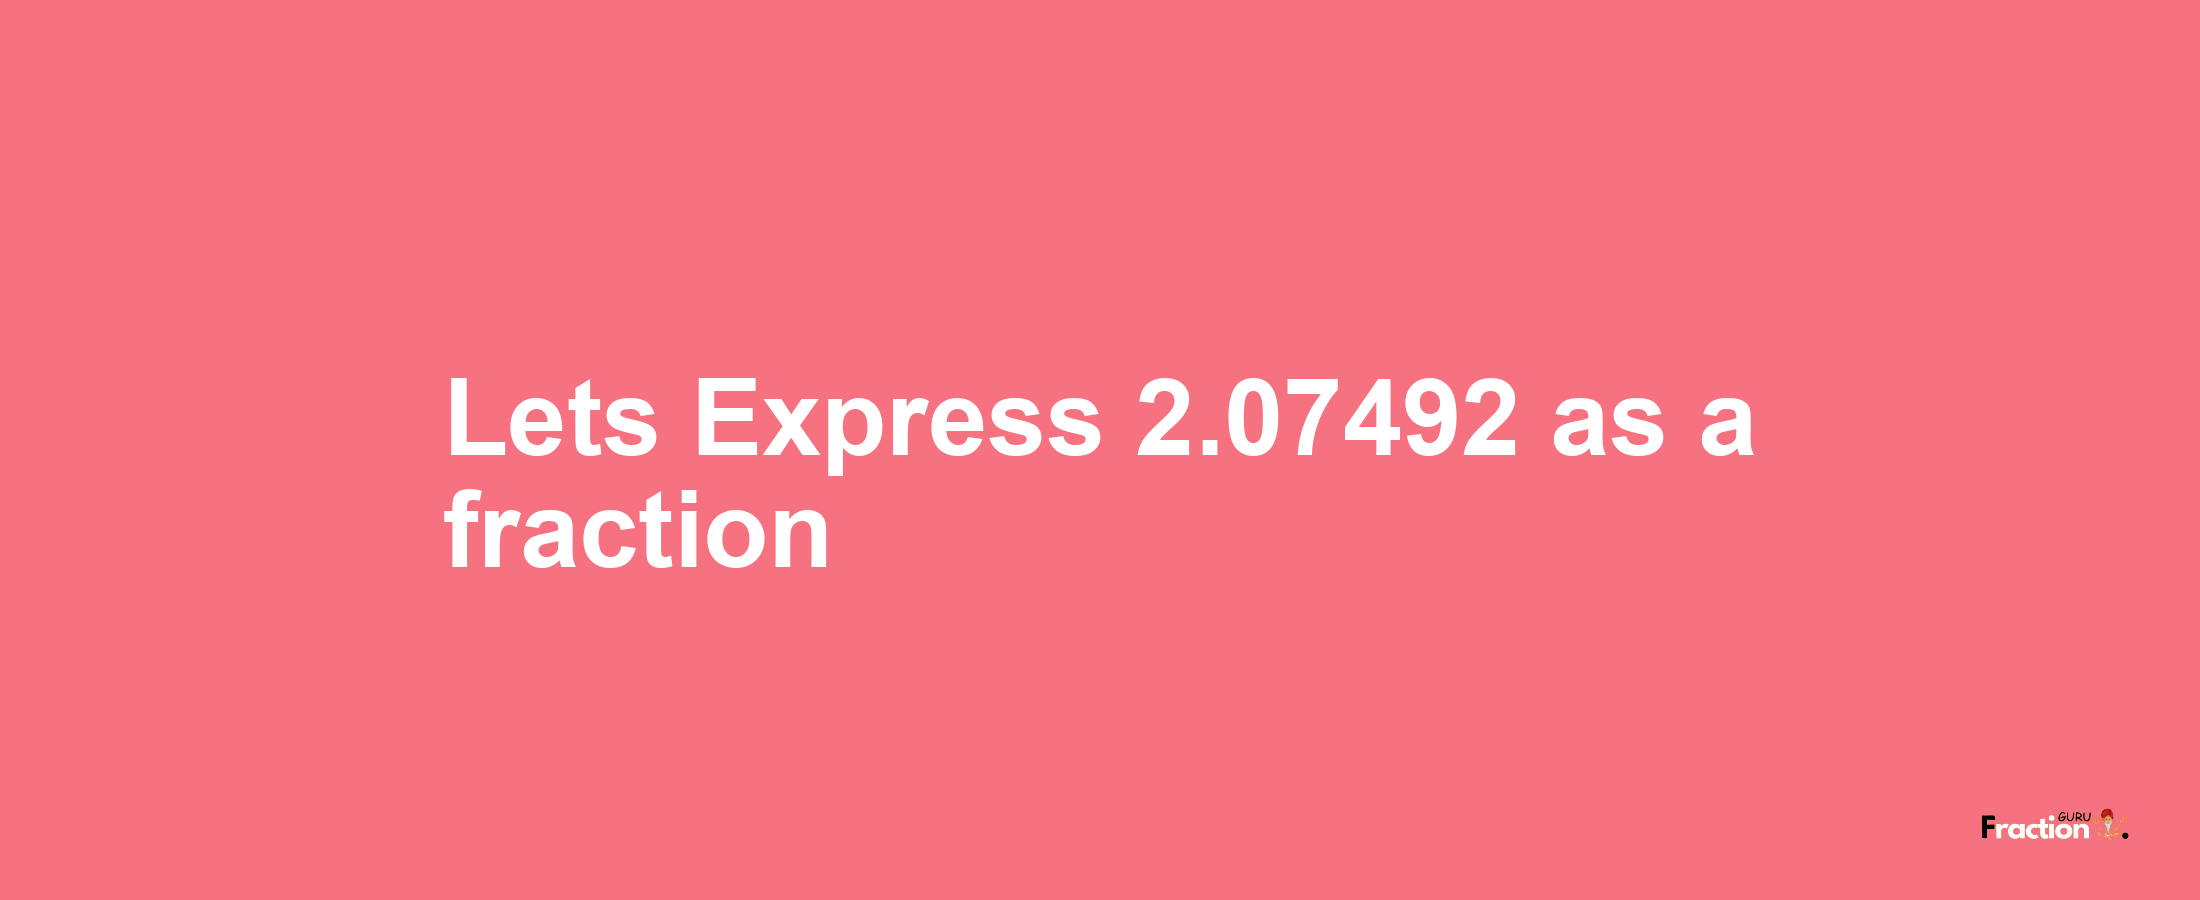 Lets Express 2.07492 as afraction